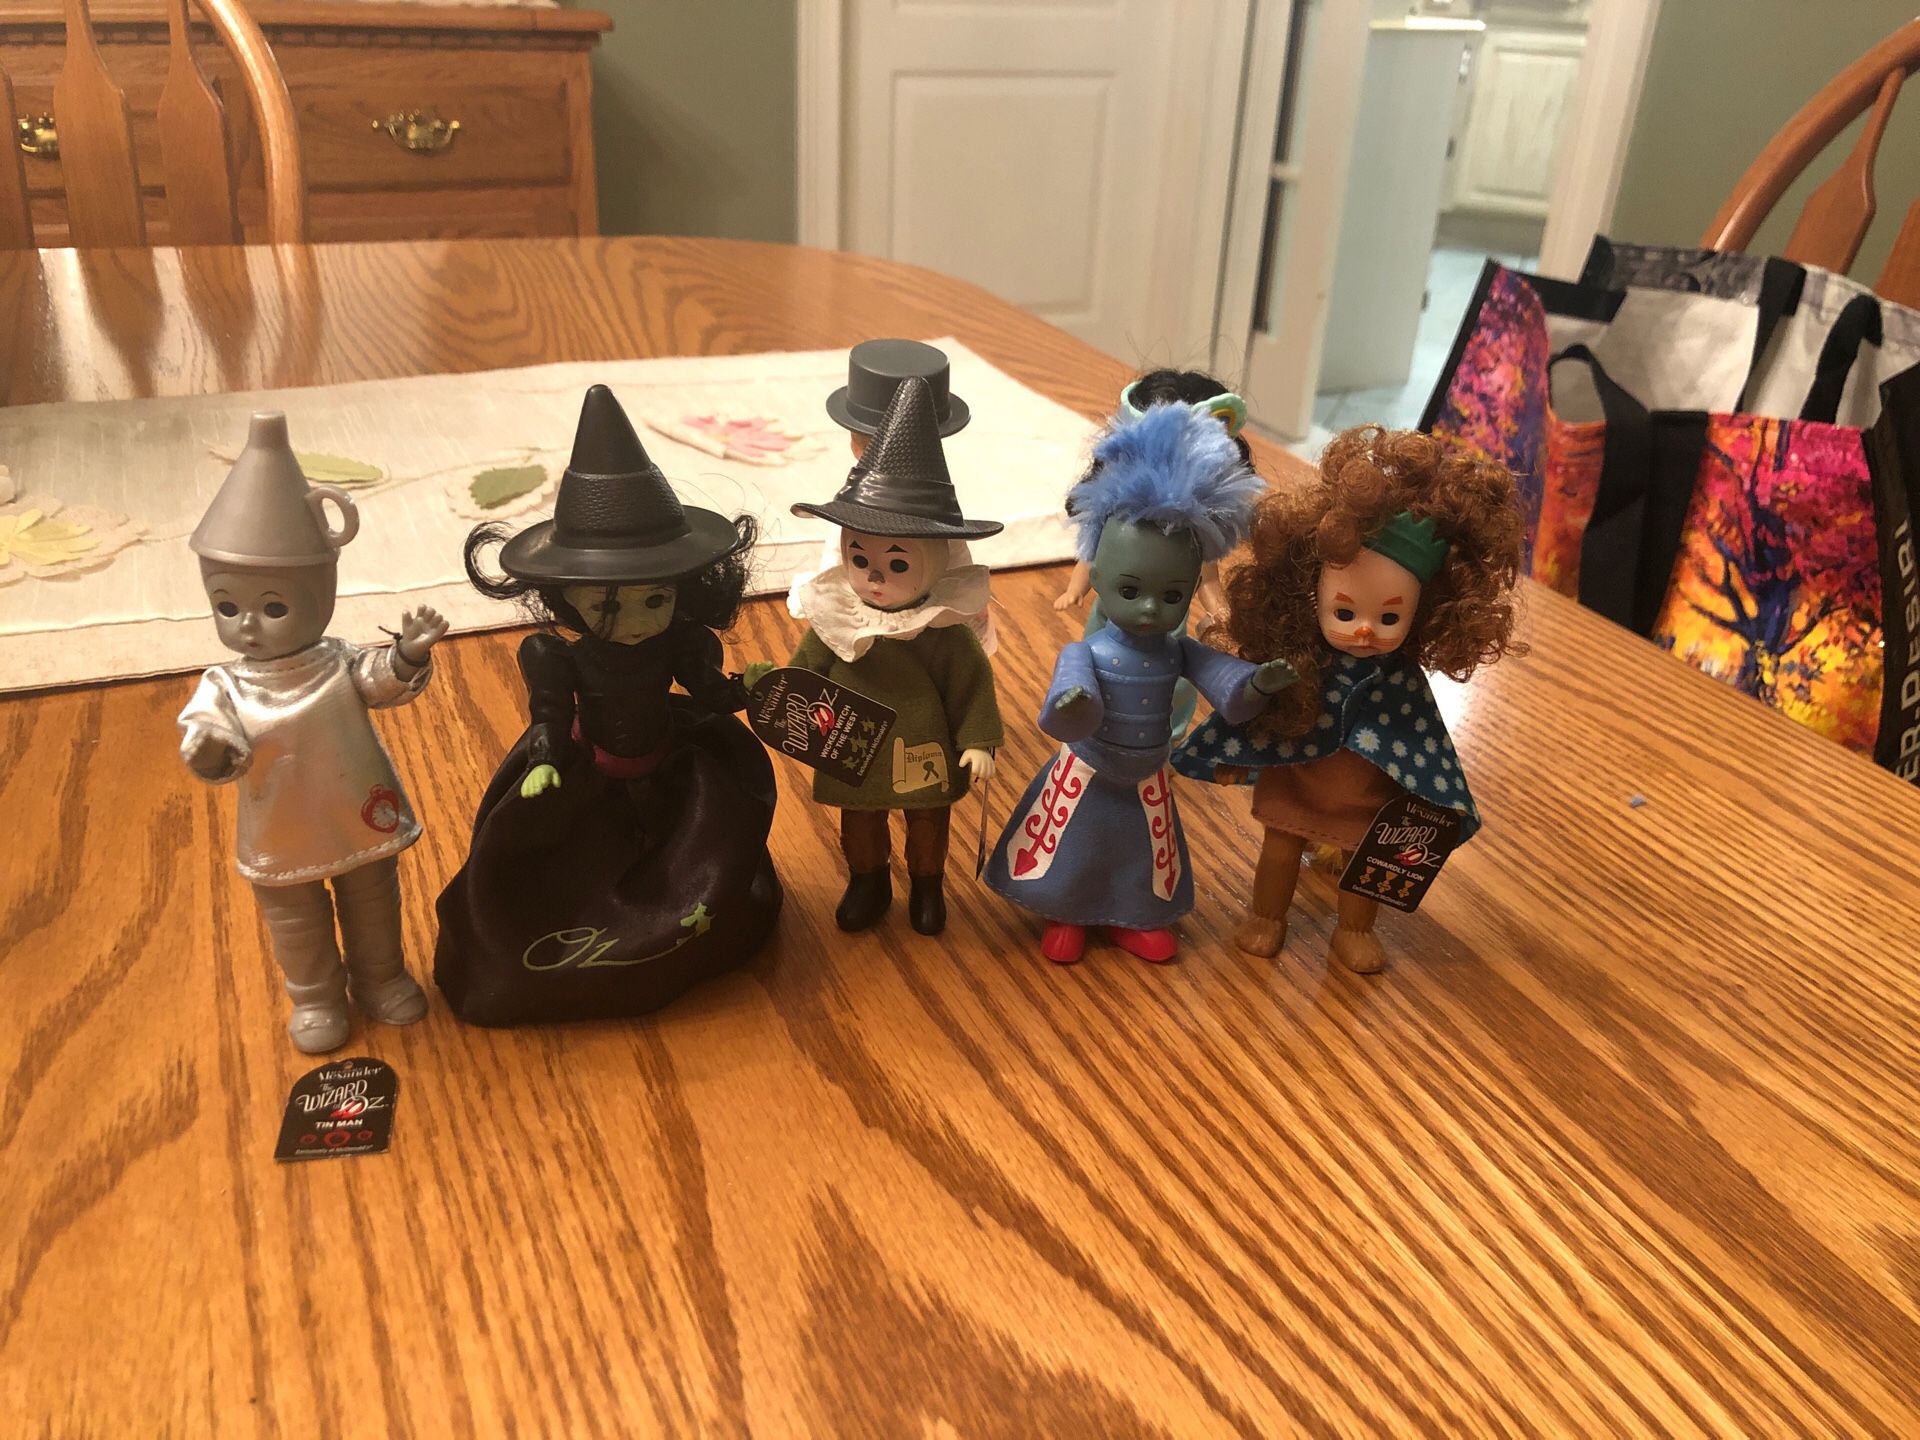 McDonalds Wizard of Oz set. The Tim man, the Wicked Witch of the West, Scarecrow, Lion, Winkie Guard